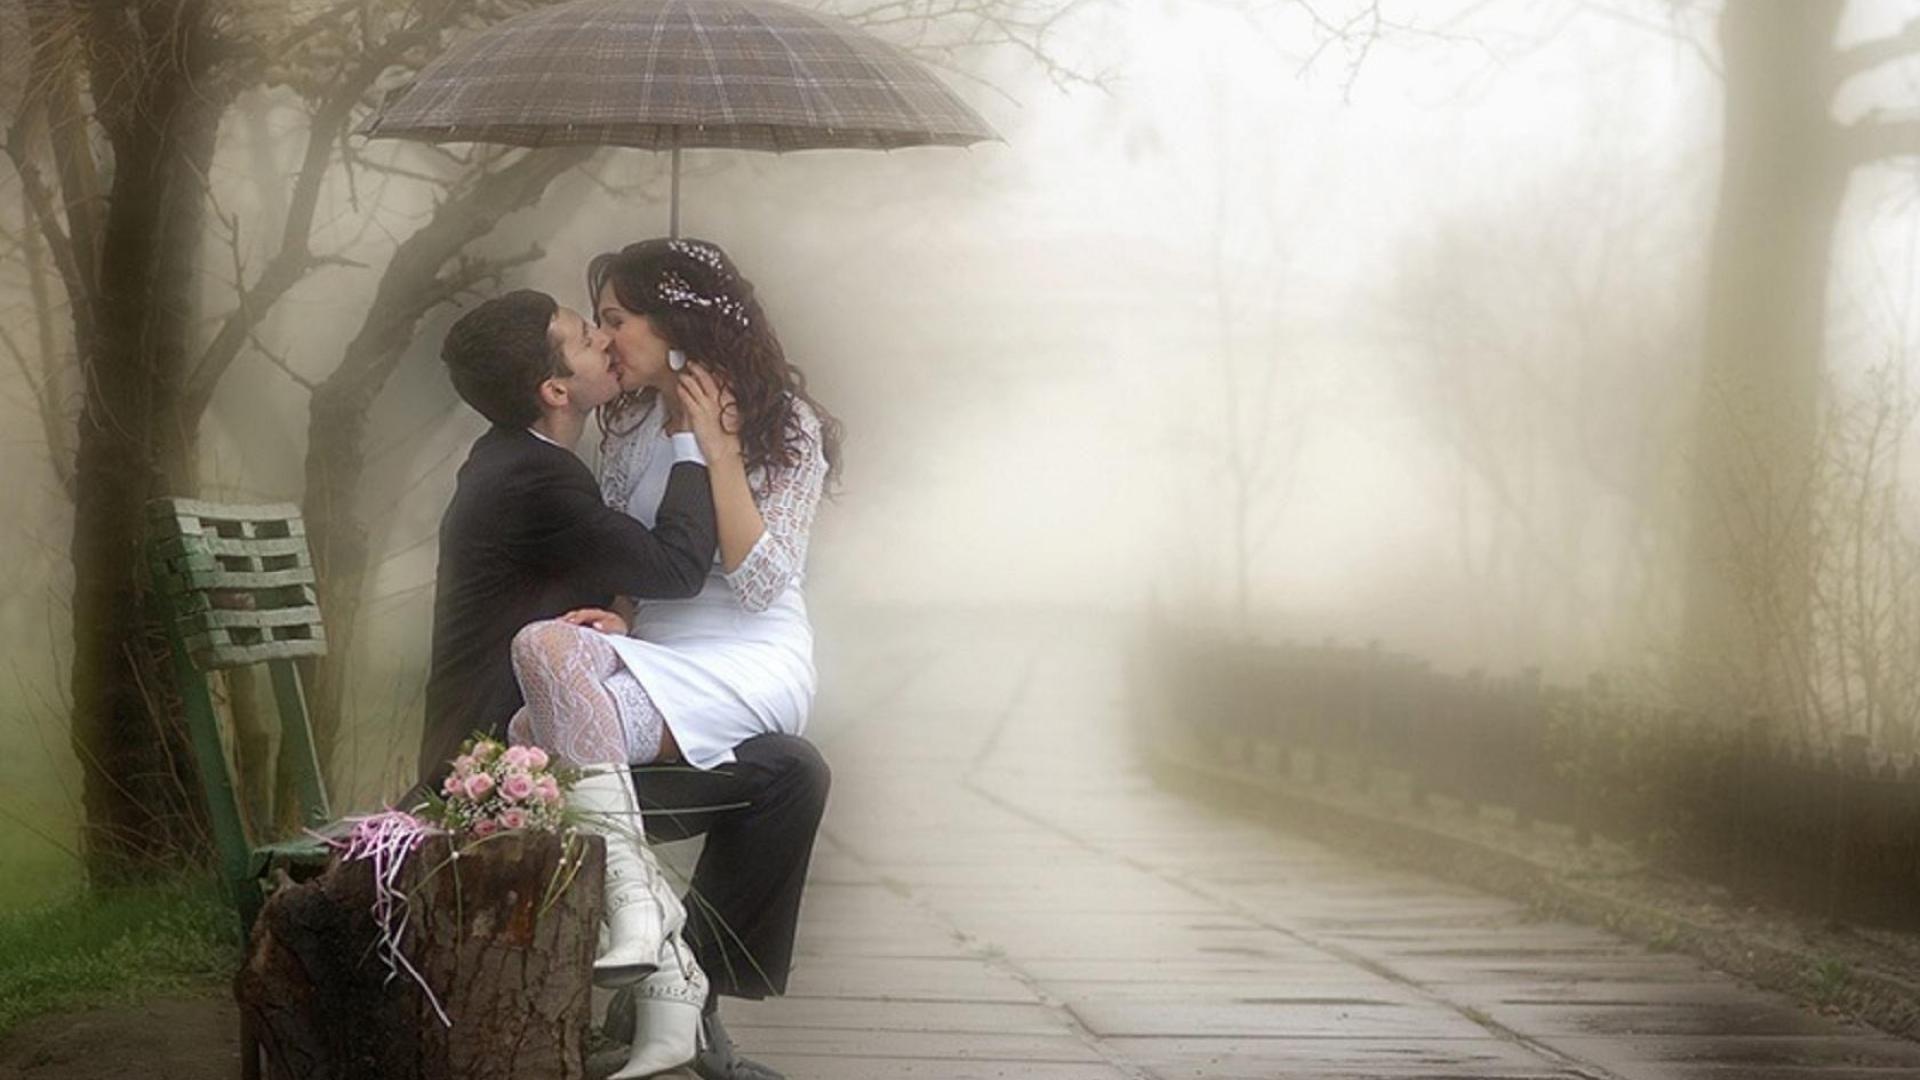 Couple in Rain, High Definition, High Quality, Widescreen